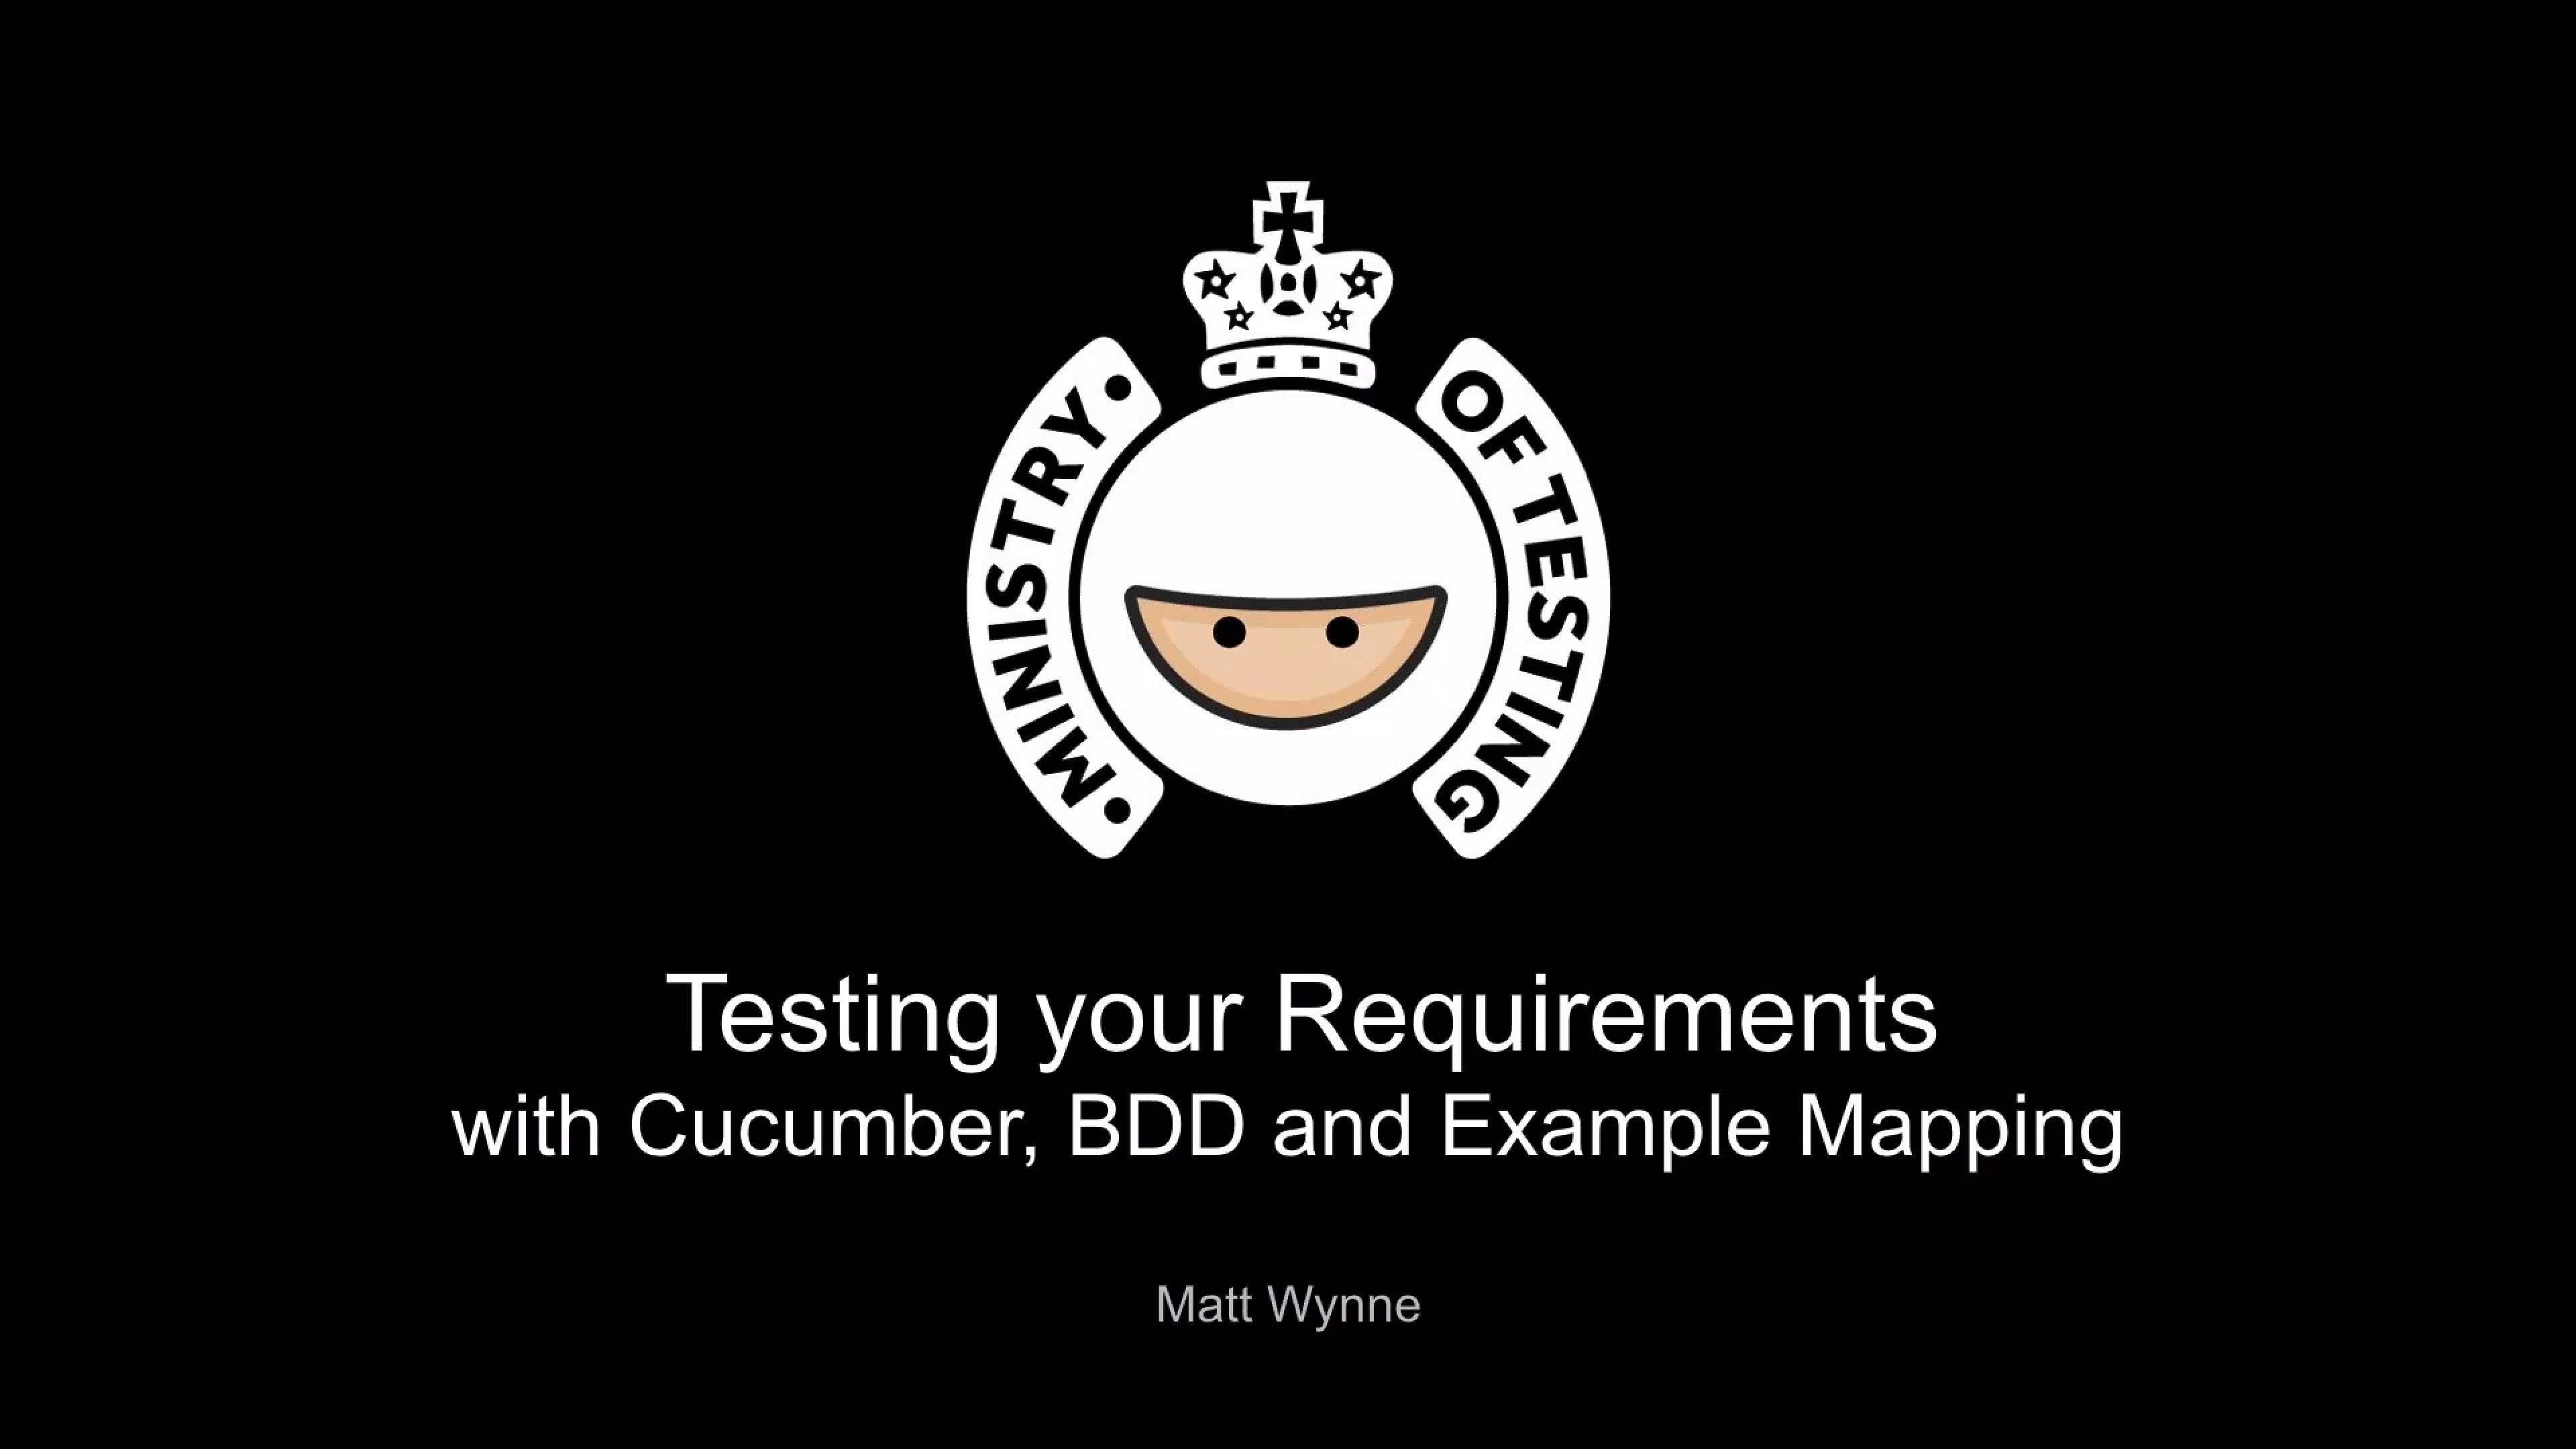 Testing Your Requirements with Cucumber, BDD and Example Mapping with Matt Wynne